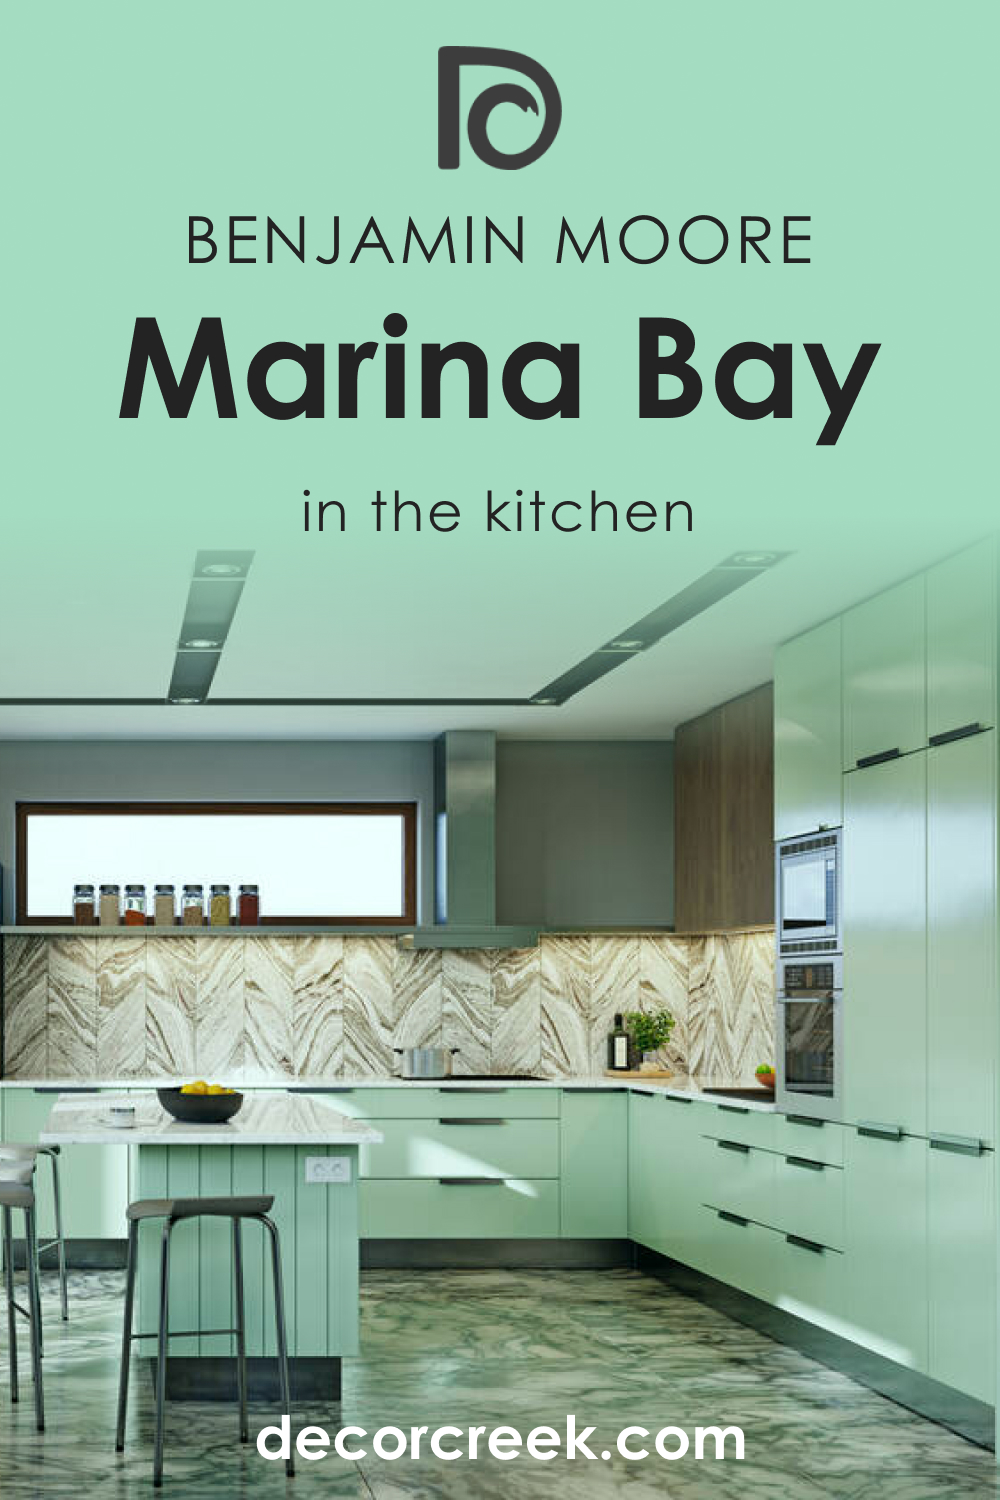 How to Use Marina Bay 2036-50 in the Kitchen?